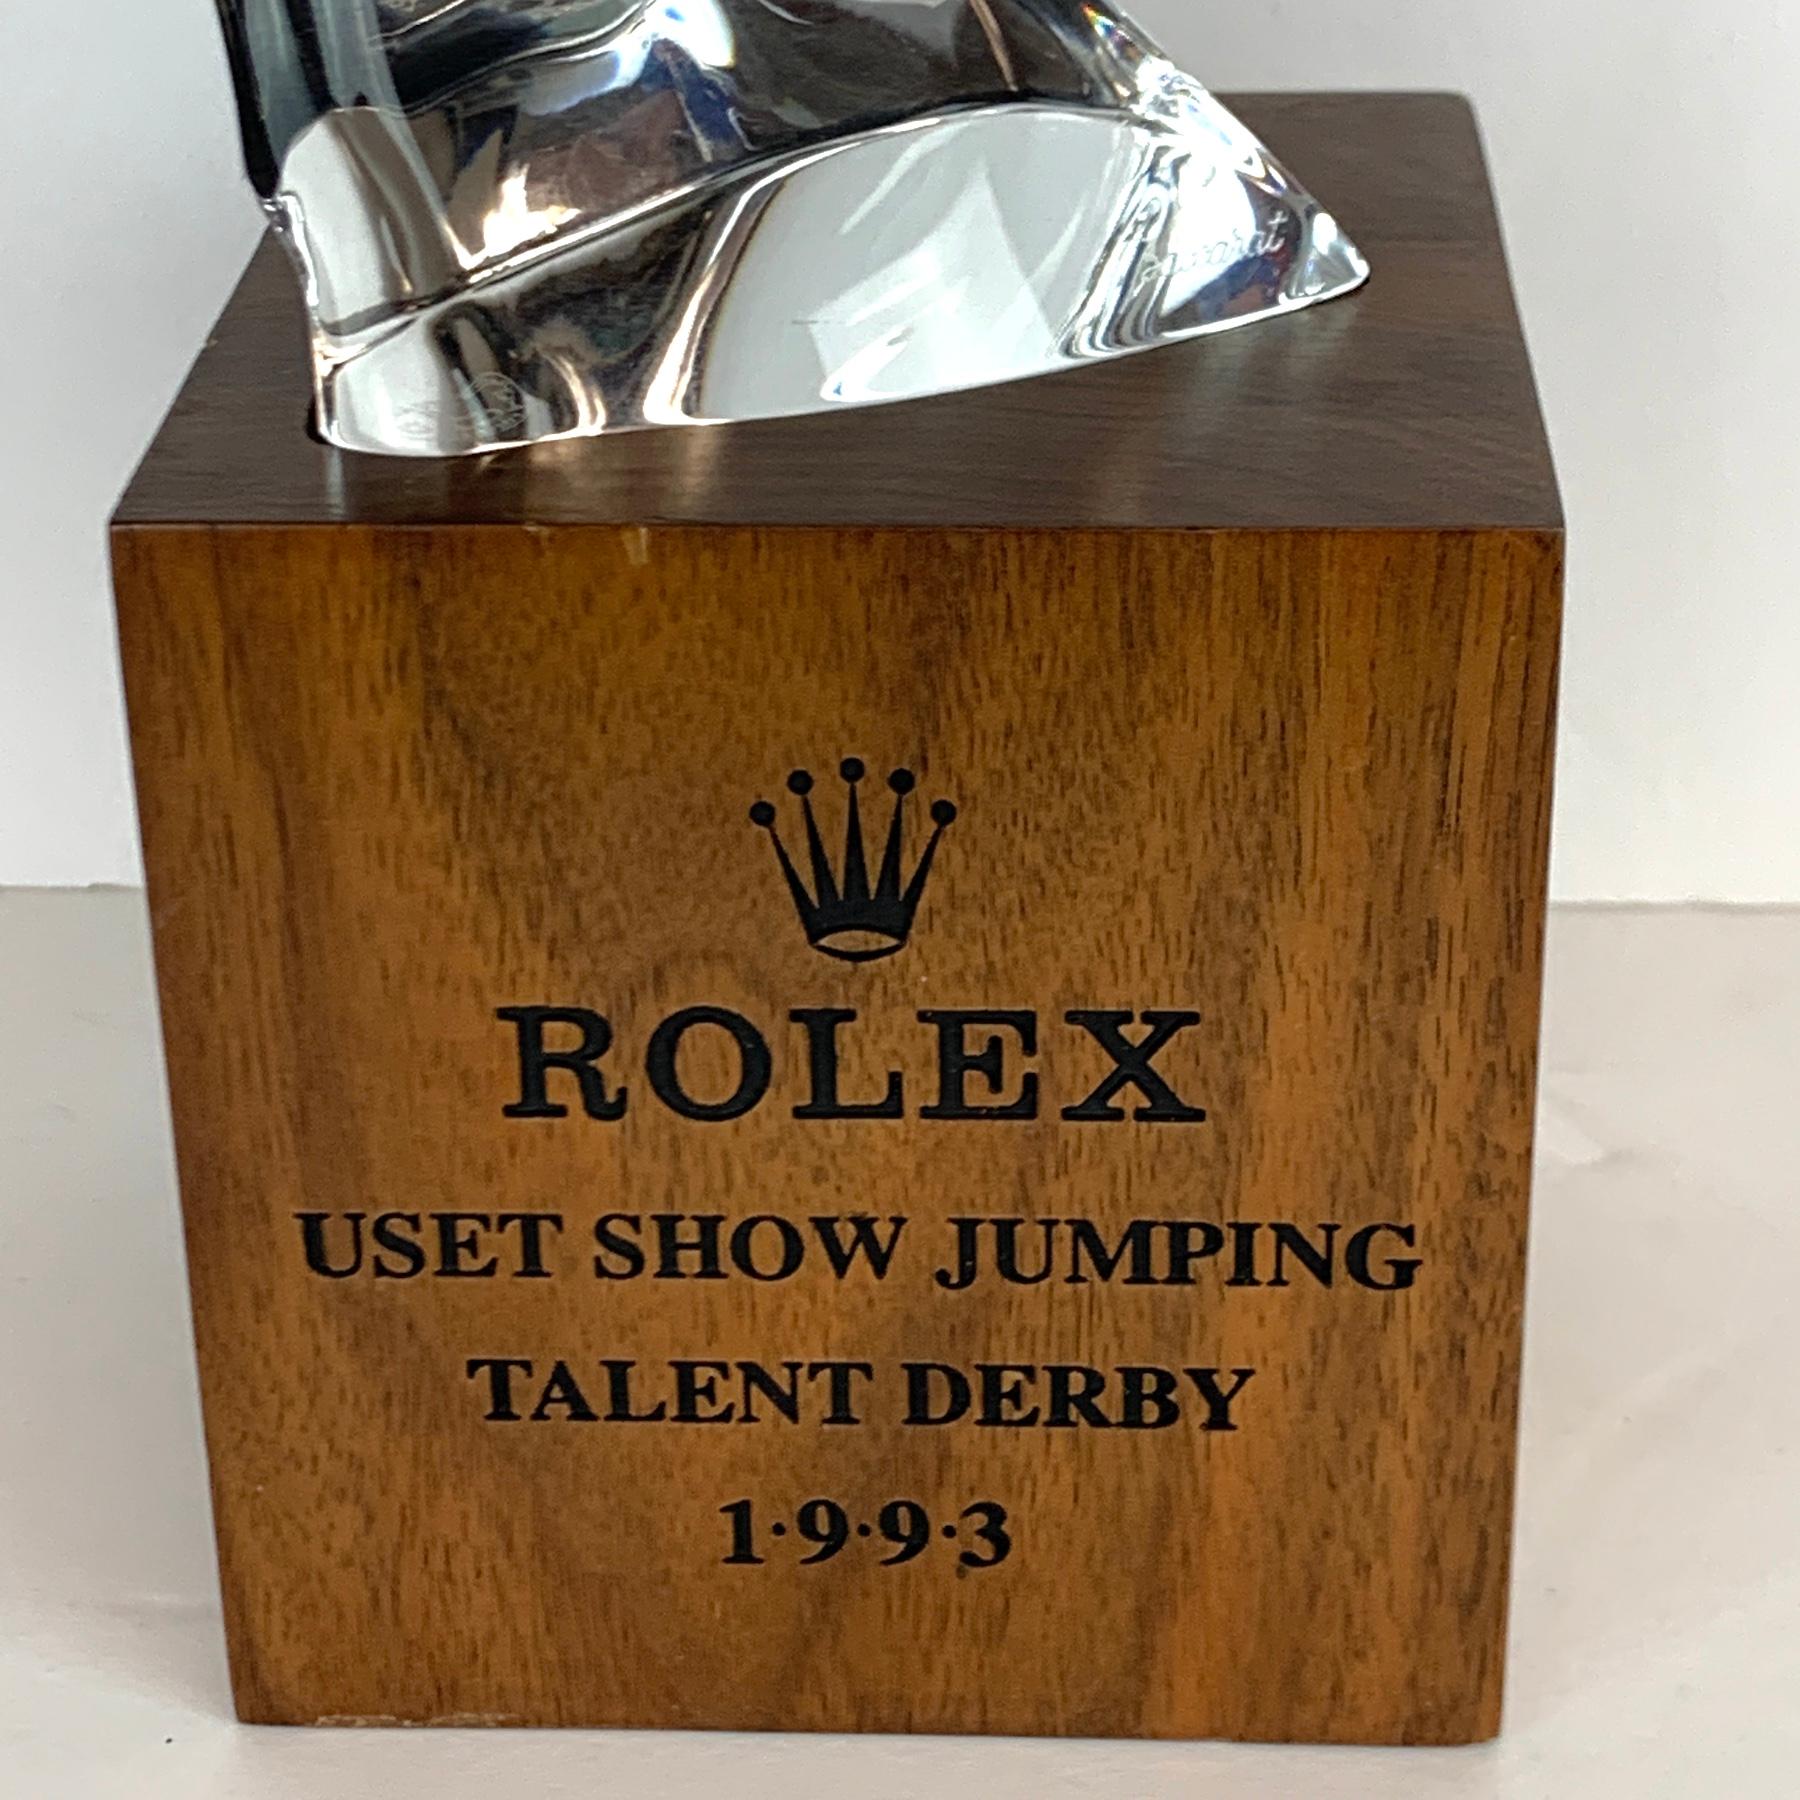 Modern Baccarat Standing Horse Trophy Rolex USET Show Jumping Talent Derby, 1993